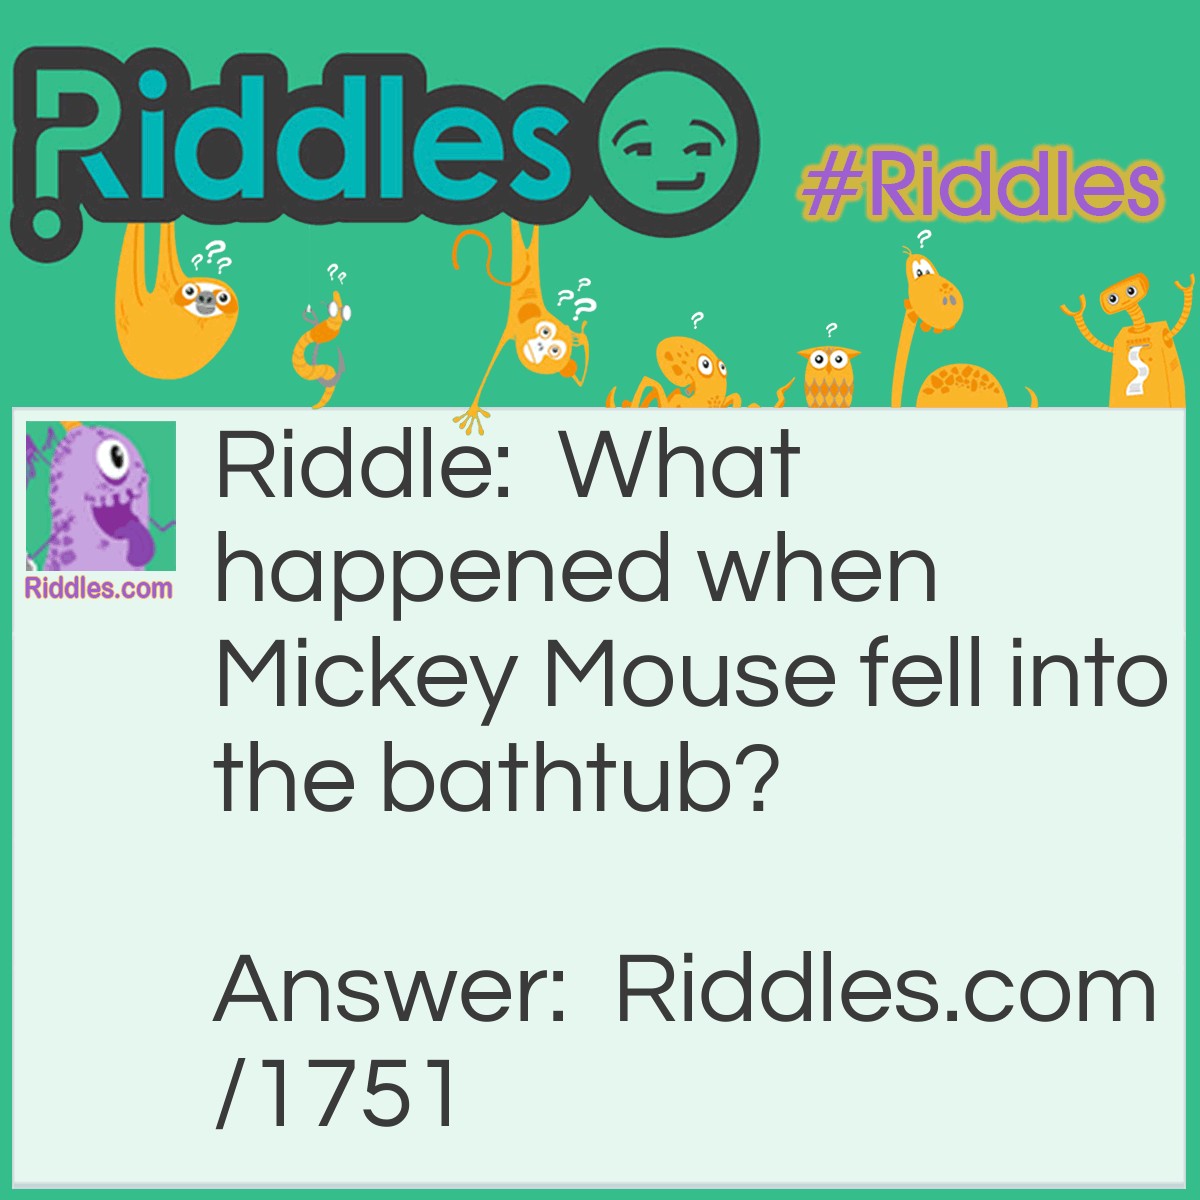 Riddle: What happened when Mickey Mouse fell into the bathtub? Answer: He came out squeaky clean.